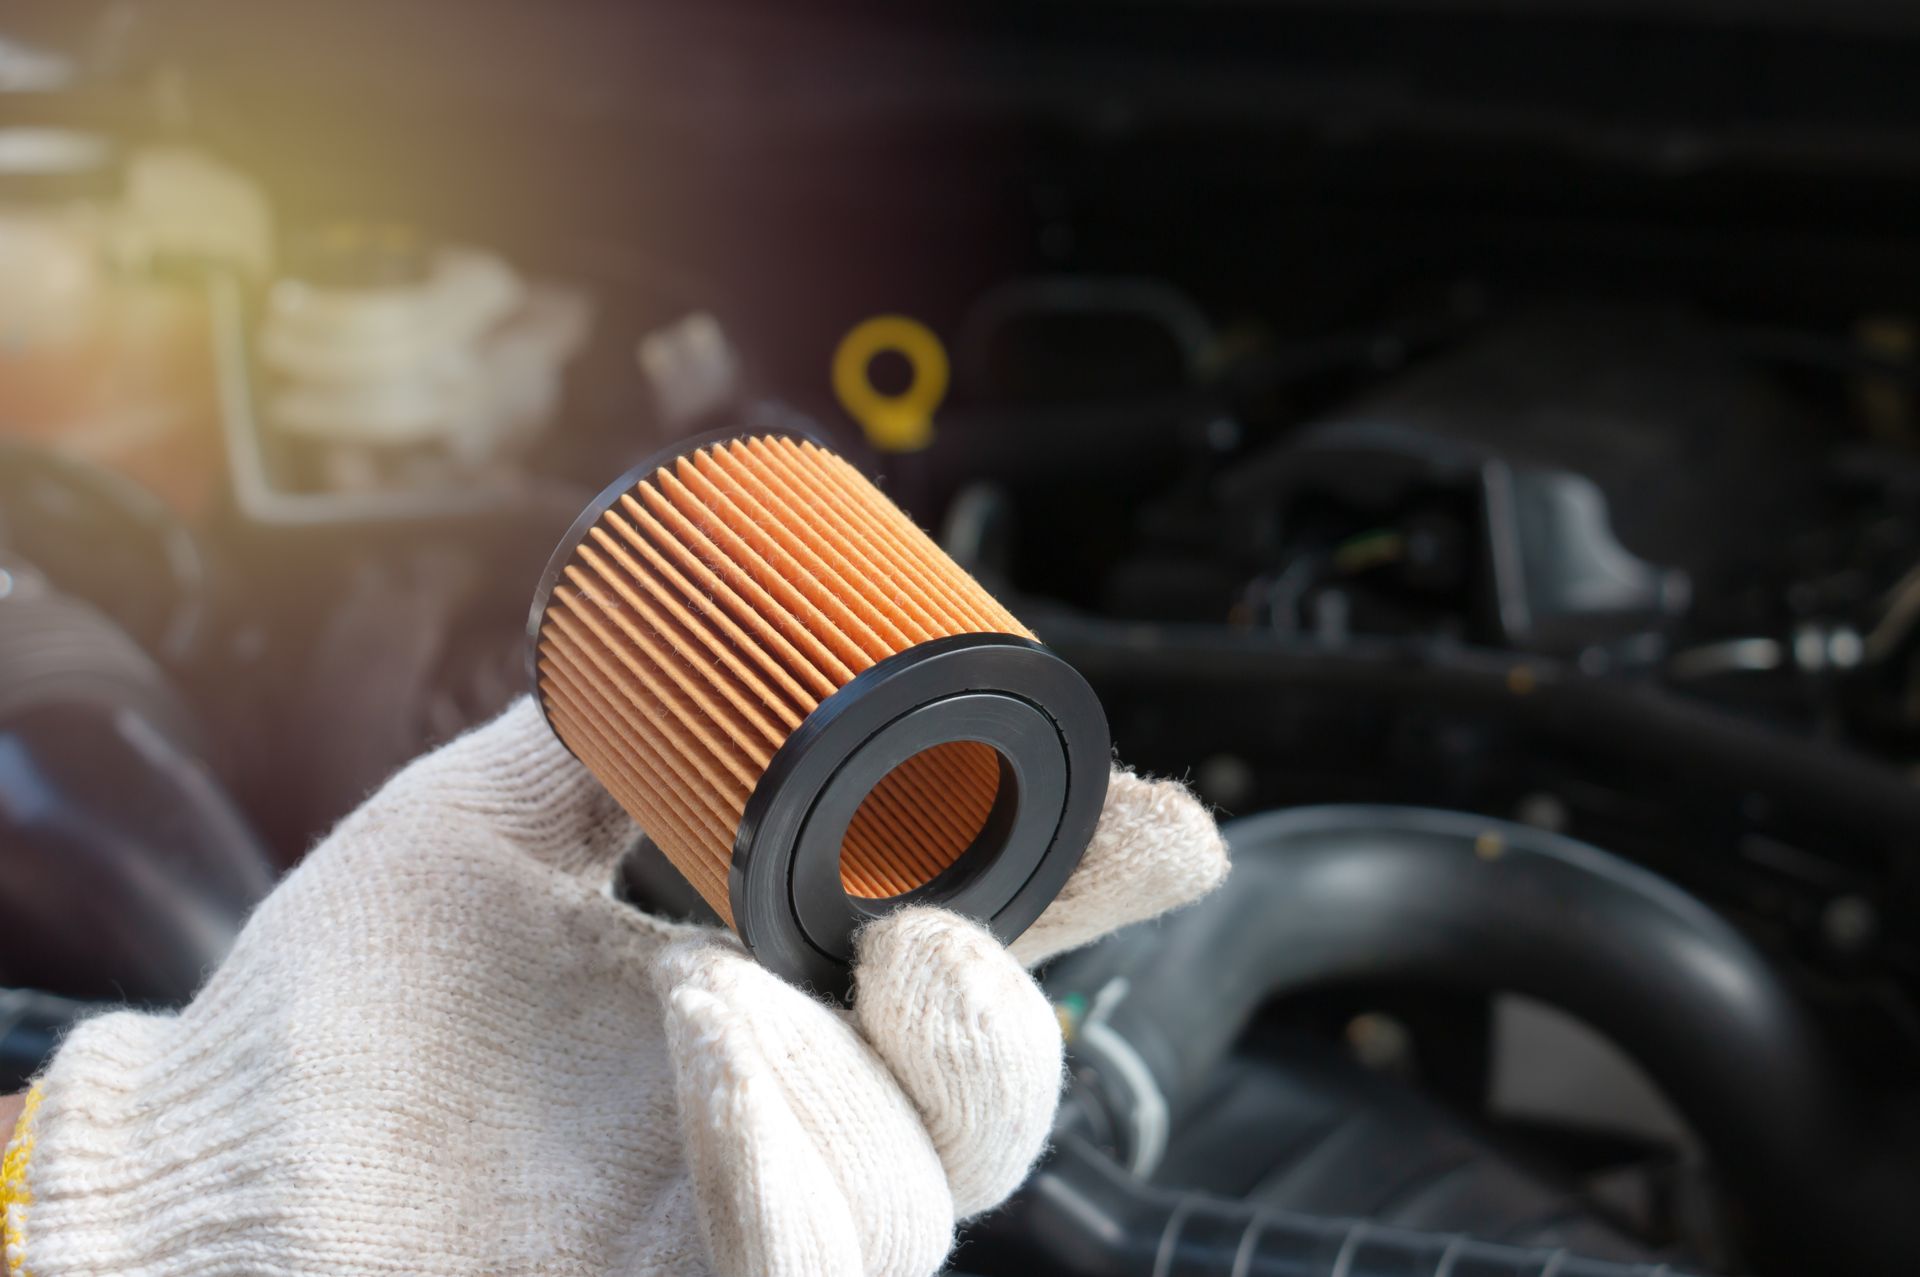 Fuel Filter Service at ﻿Future Tire and Automotive﻿ in ﻿Holbrook, Lakeside, Pinetop, and Show Low, AZ﻿